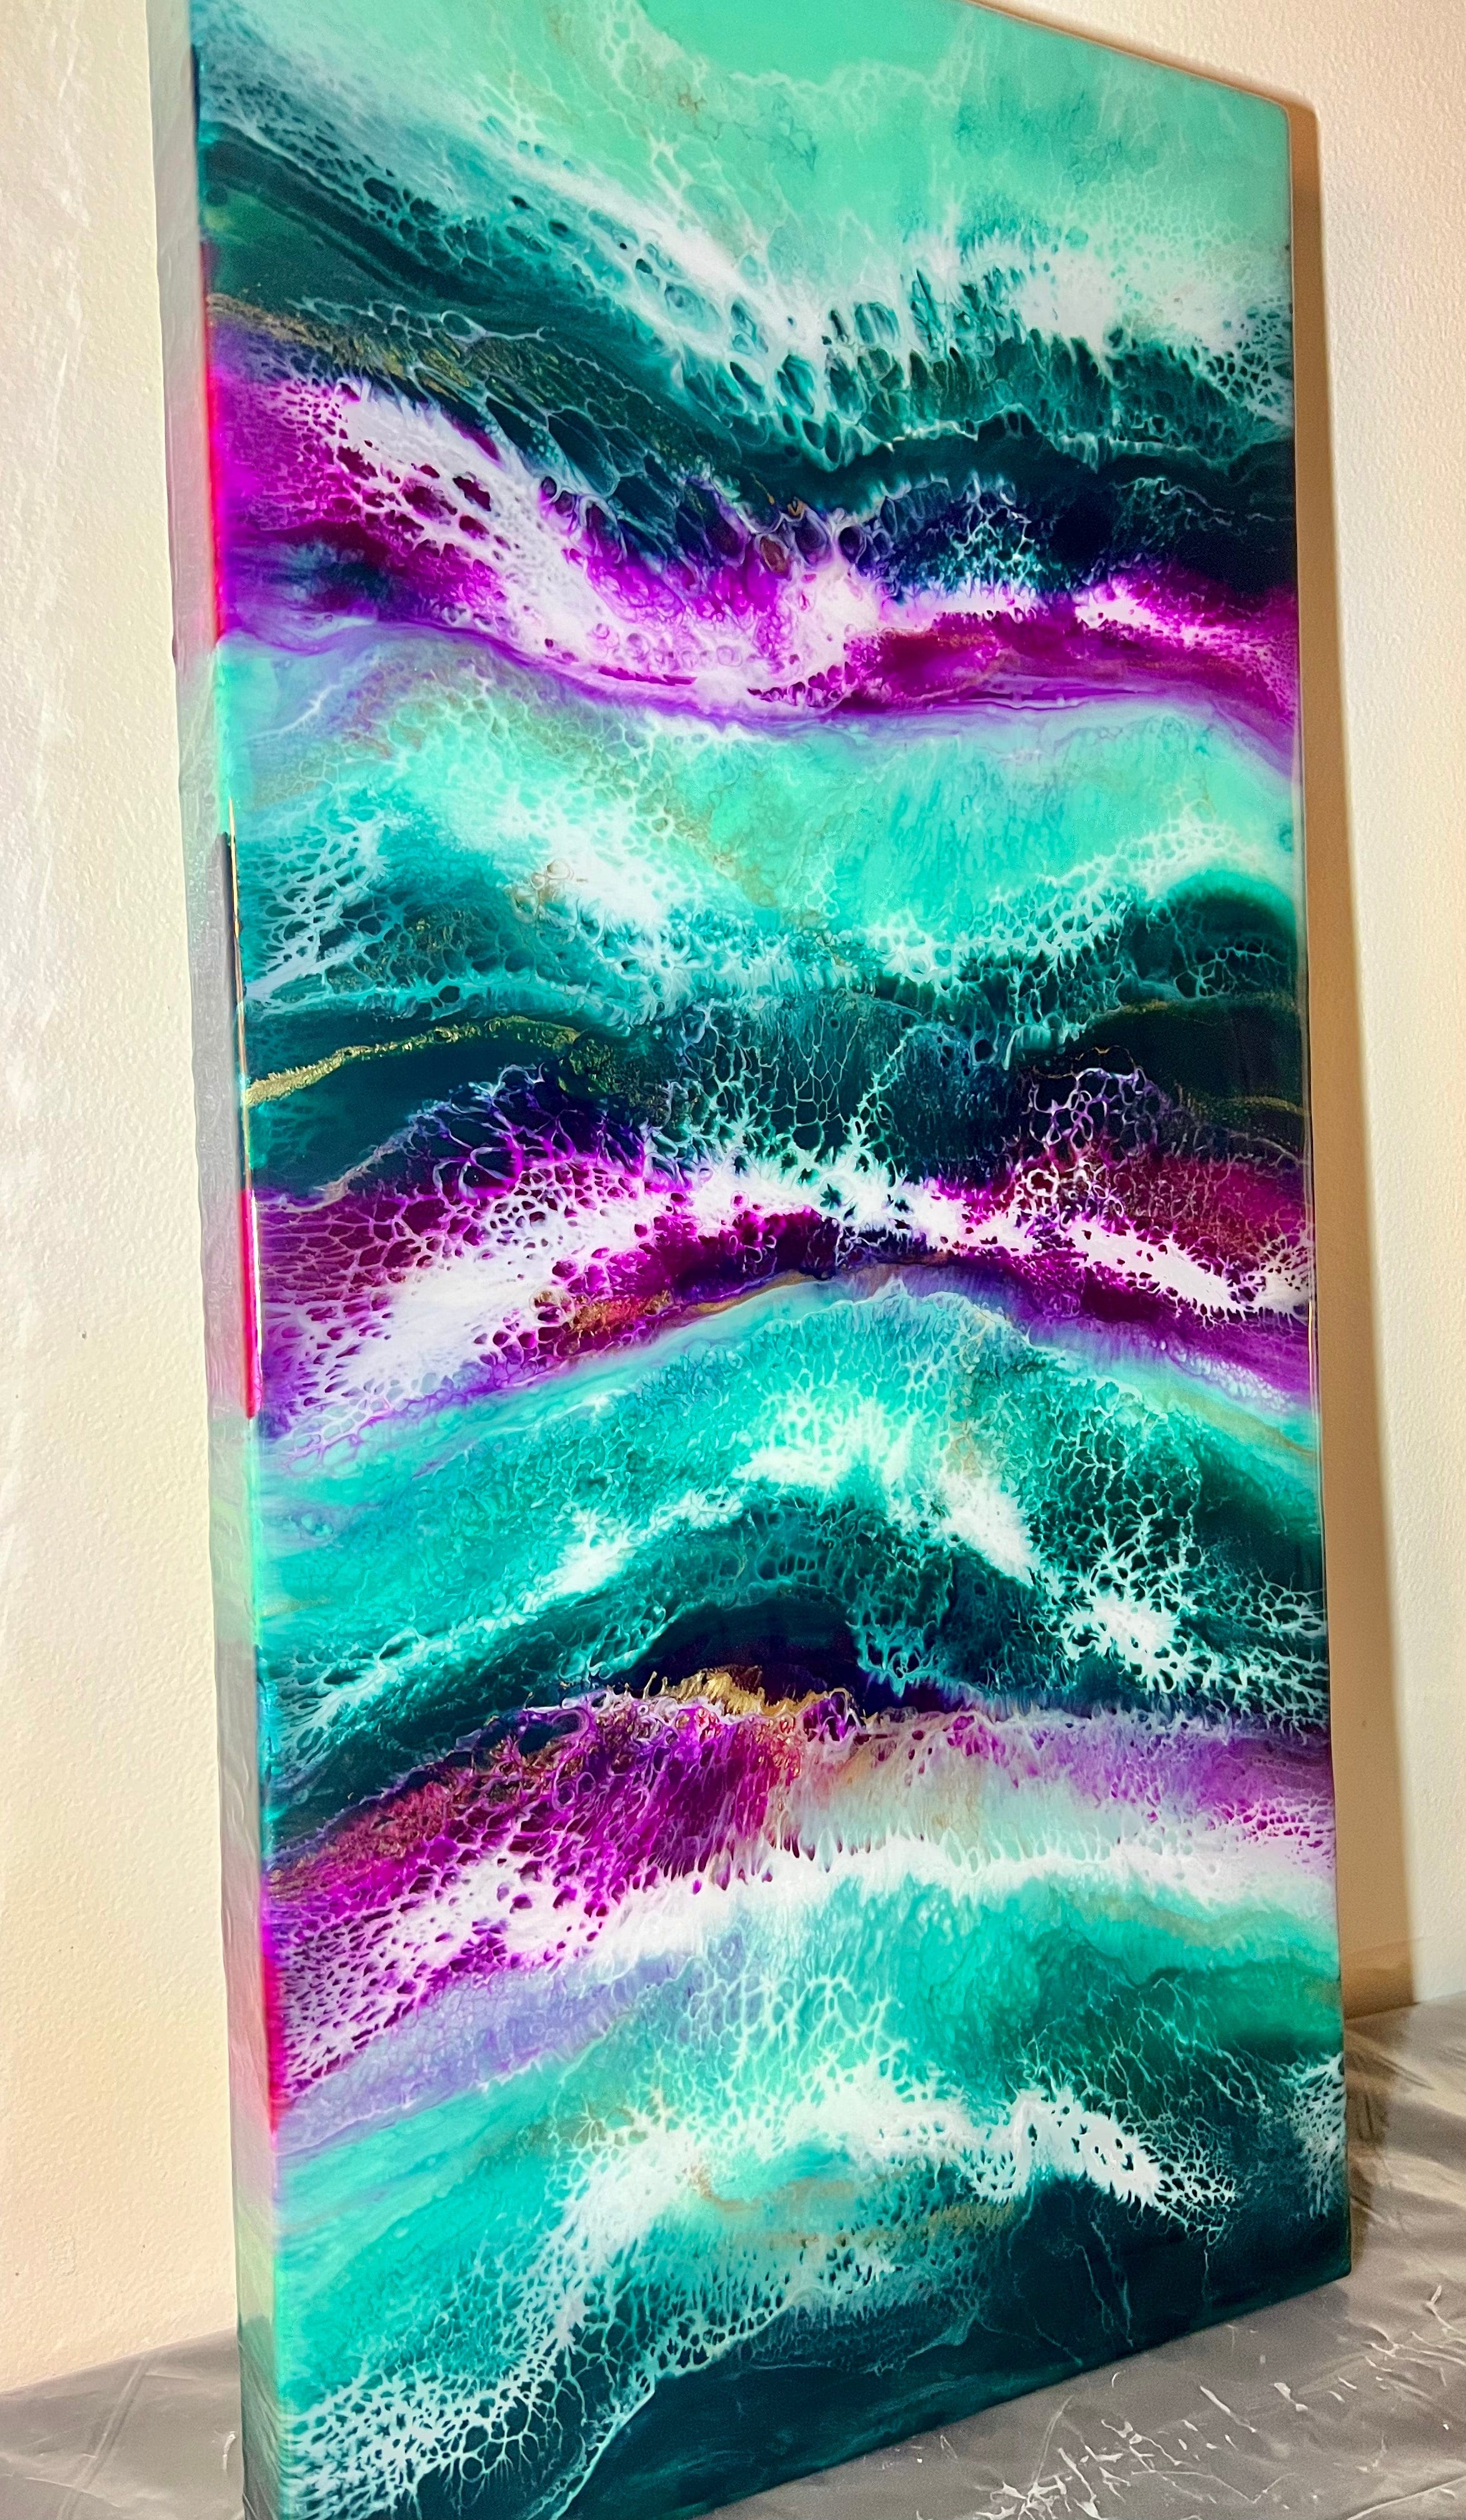  11 x 14 x 3/4 Original Abstract Acrylic Resin Painting Art  Violet Plum Teal Gold Pour Painting Technique New : Handmade Products